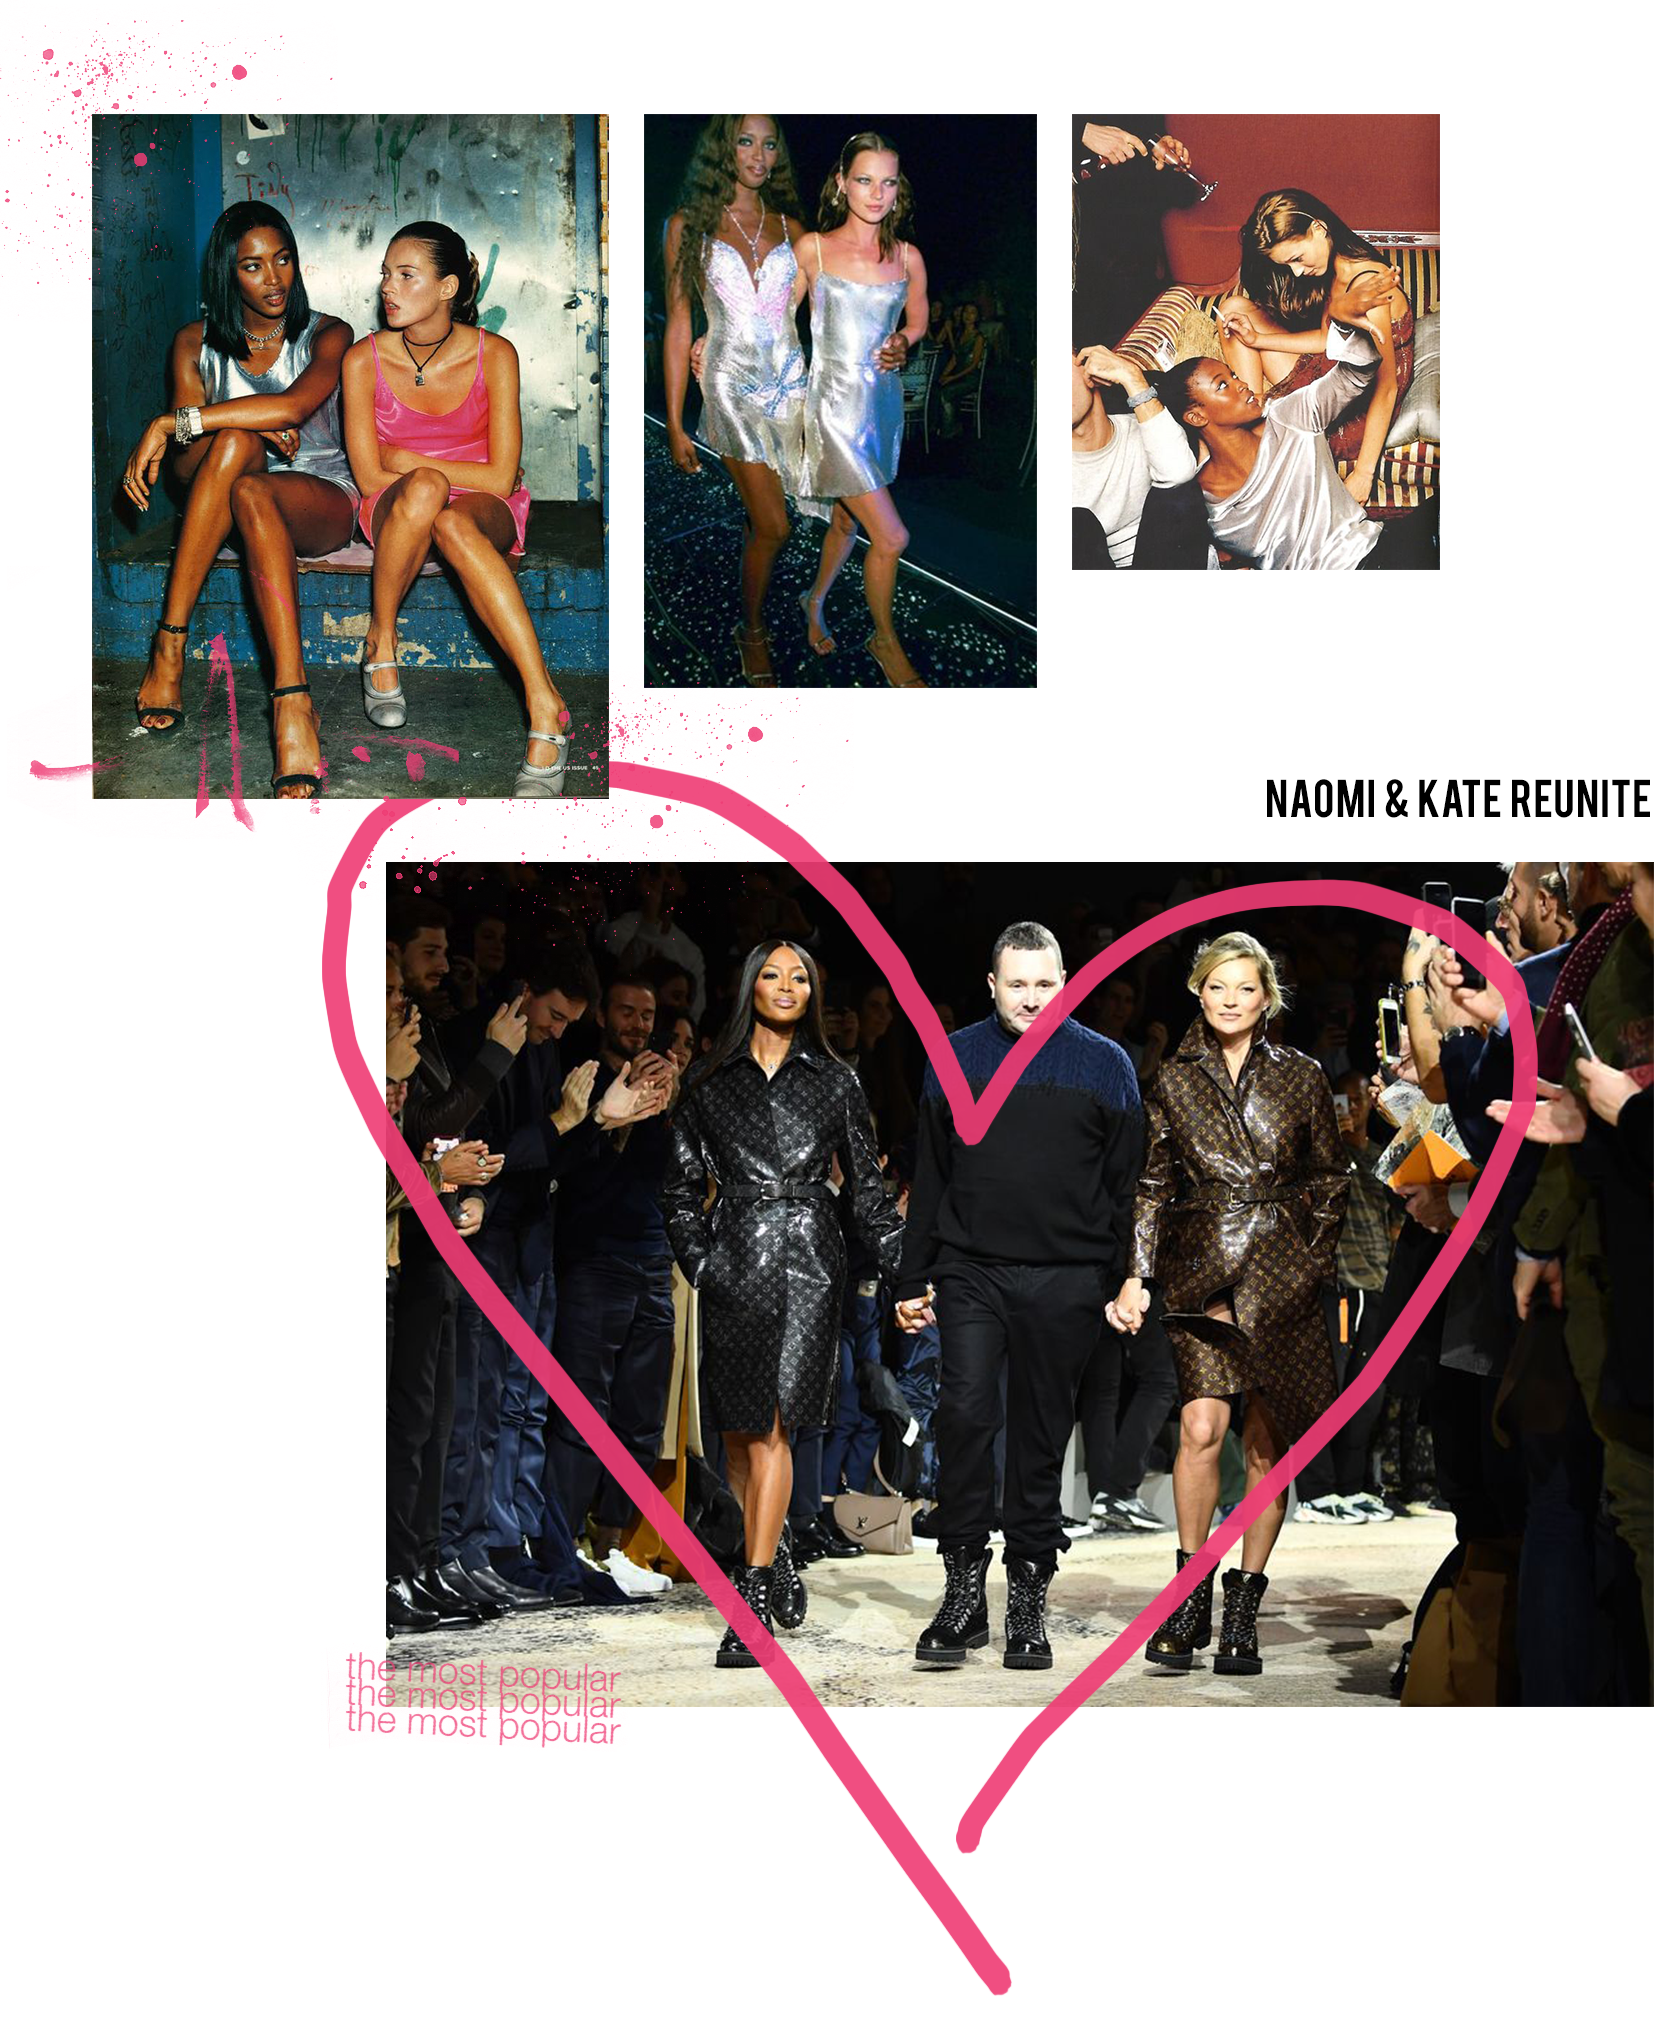 Image collage of Naomi Campbell and Kate Moss modelling